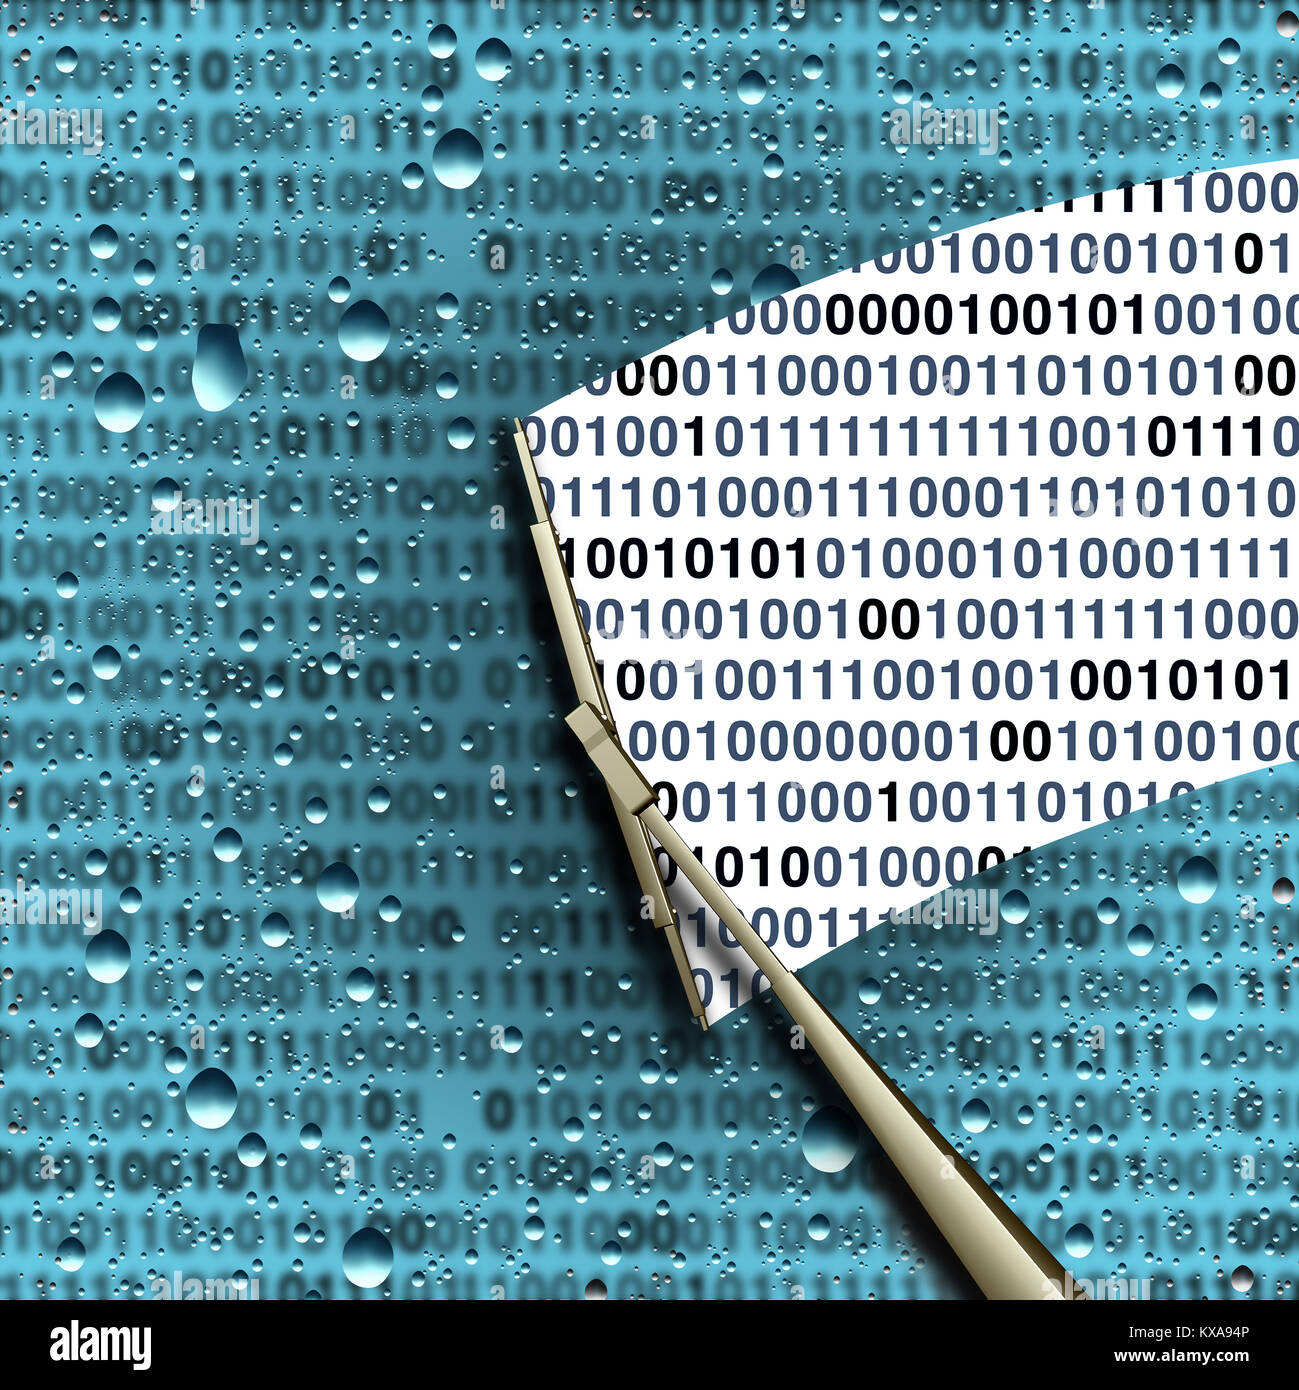 Decryption and decrypting data or decode and decoding encrypted digital information and crack the code symbol as a coding technology security. Stock Photo